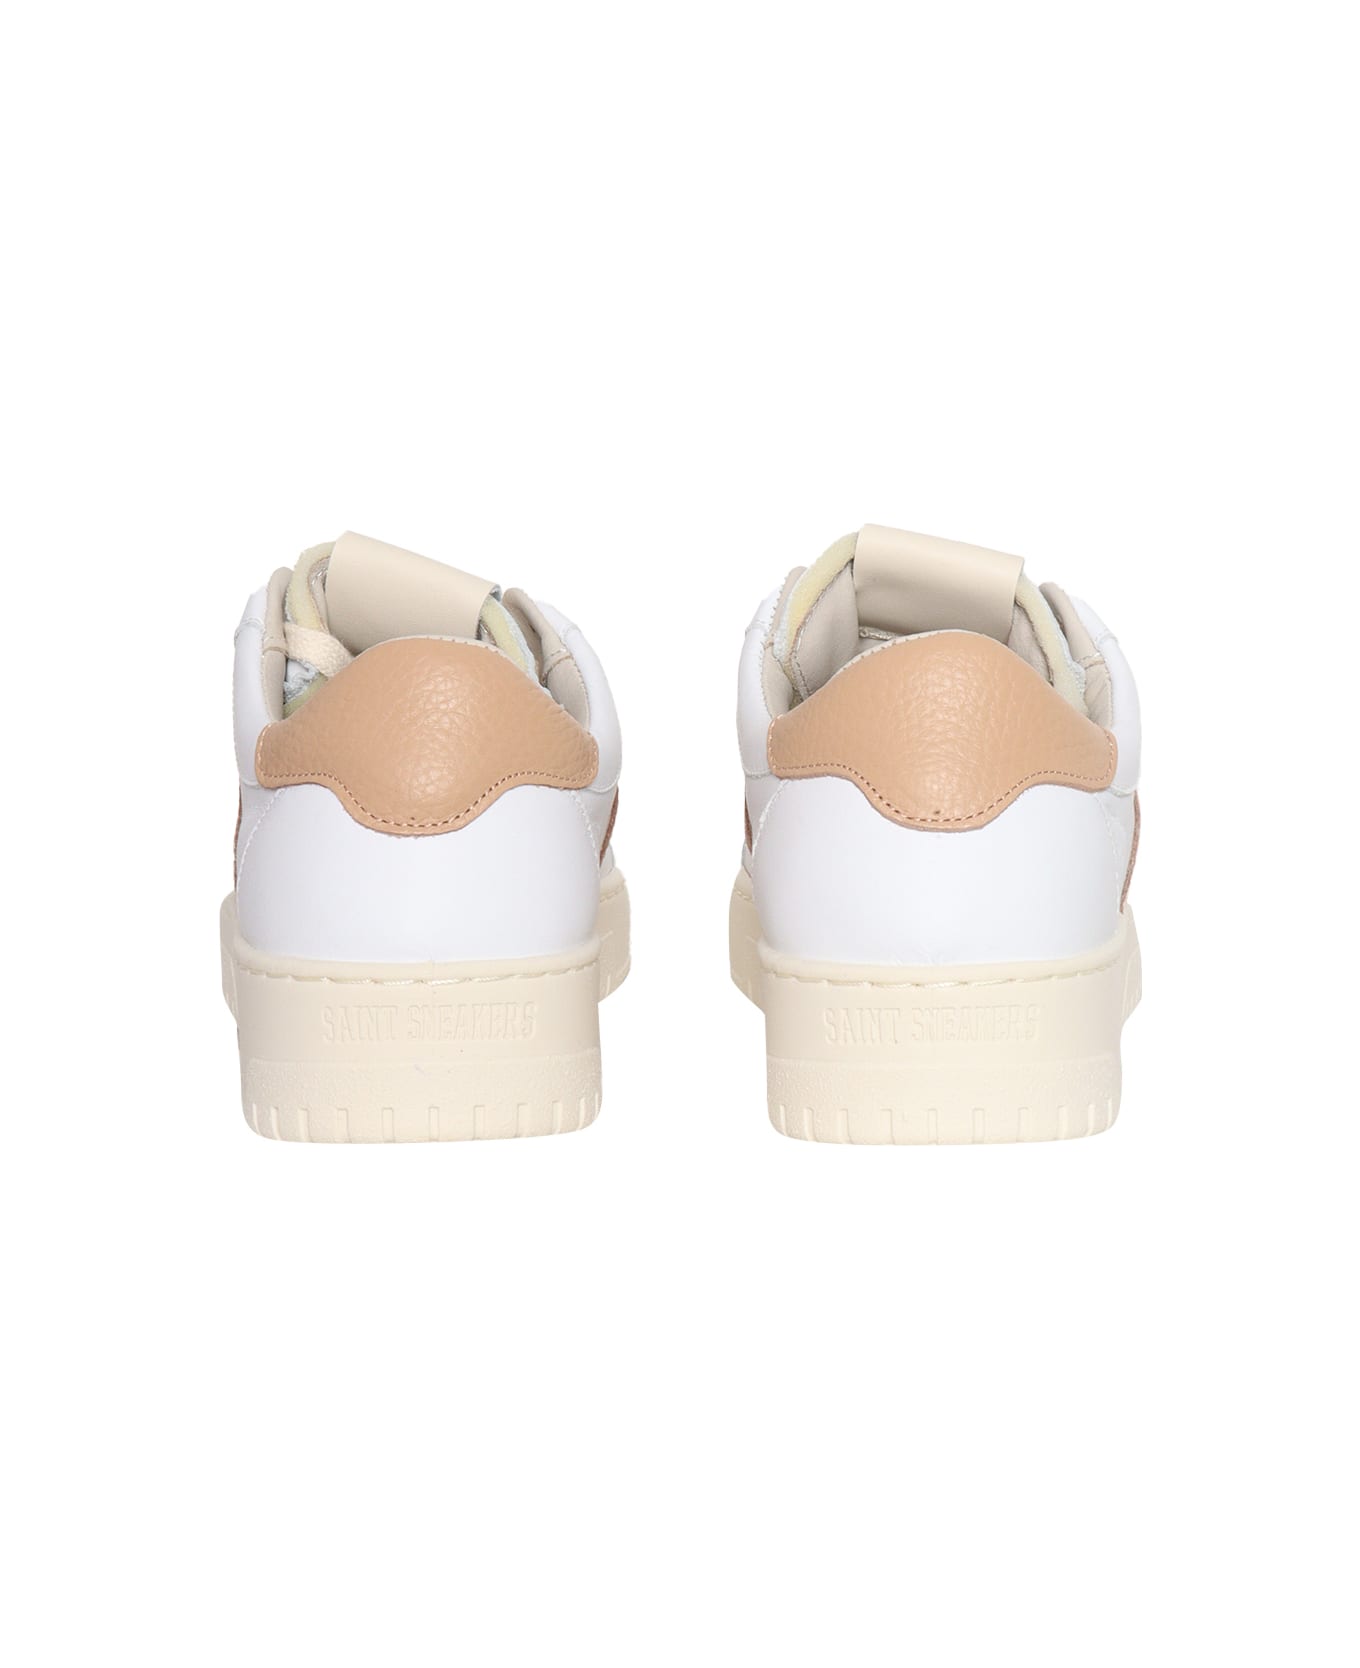 Saint Sneakers White And Pink Leather Tennis - WHITE